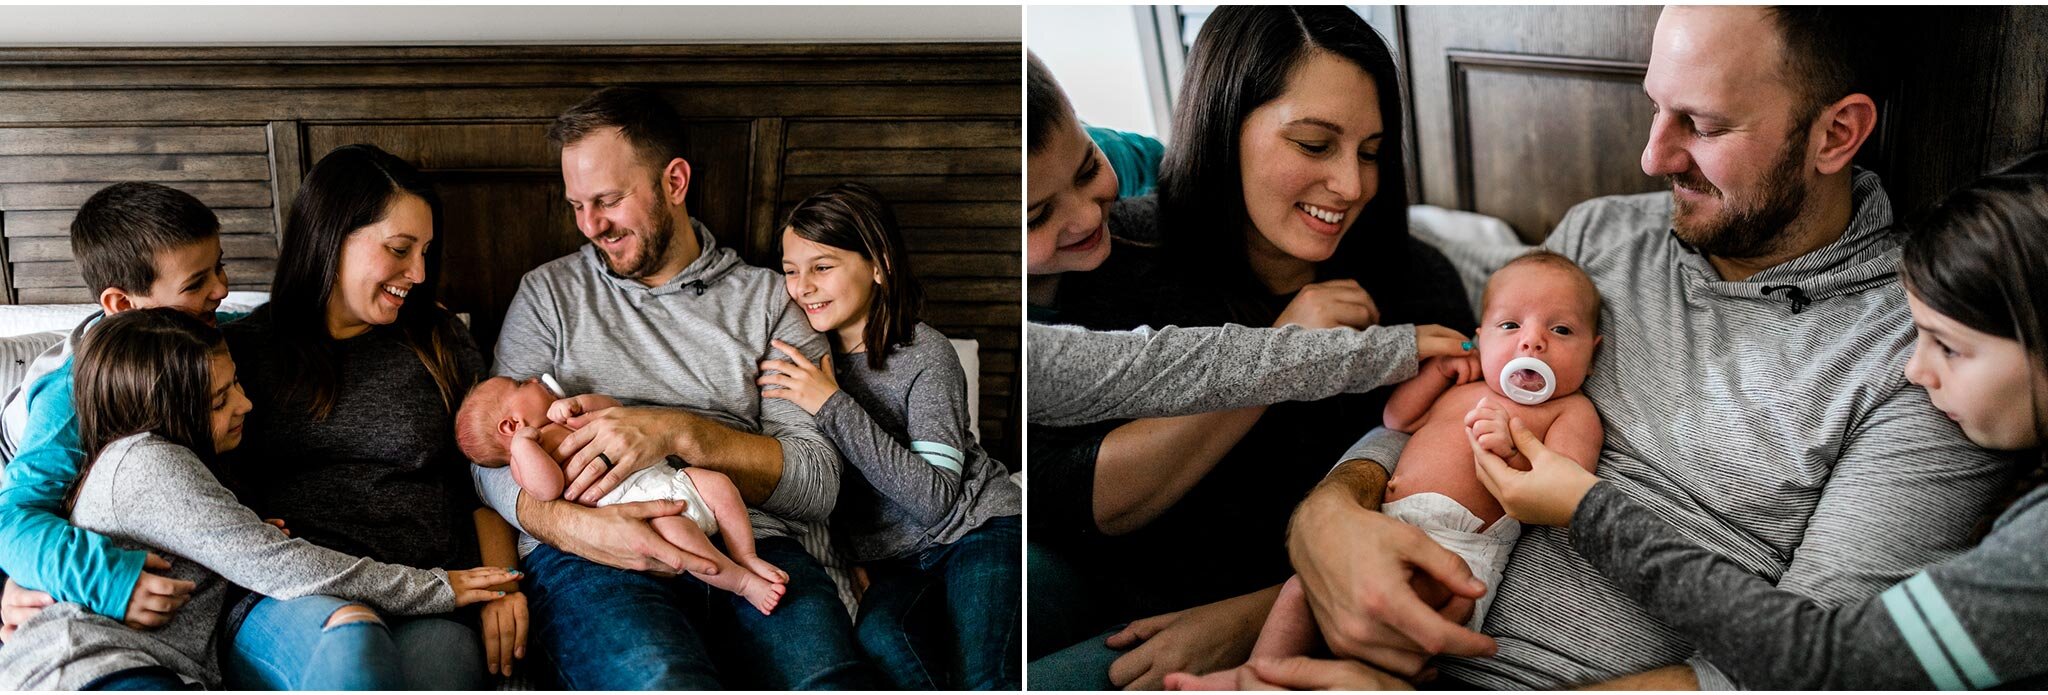 Family snuggling together on bed holding baby boy | Raleigh Family Photographer | By G. Lin Photography